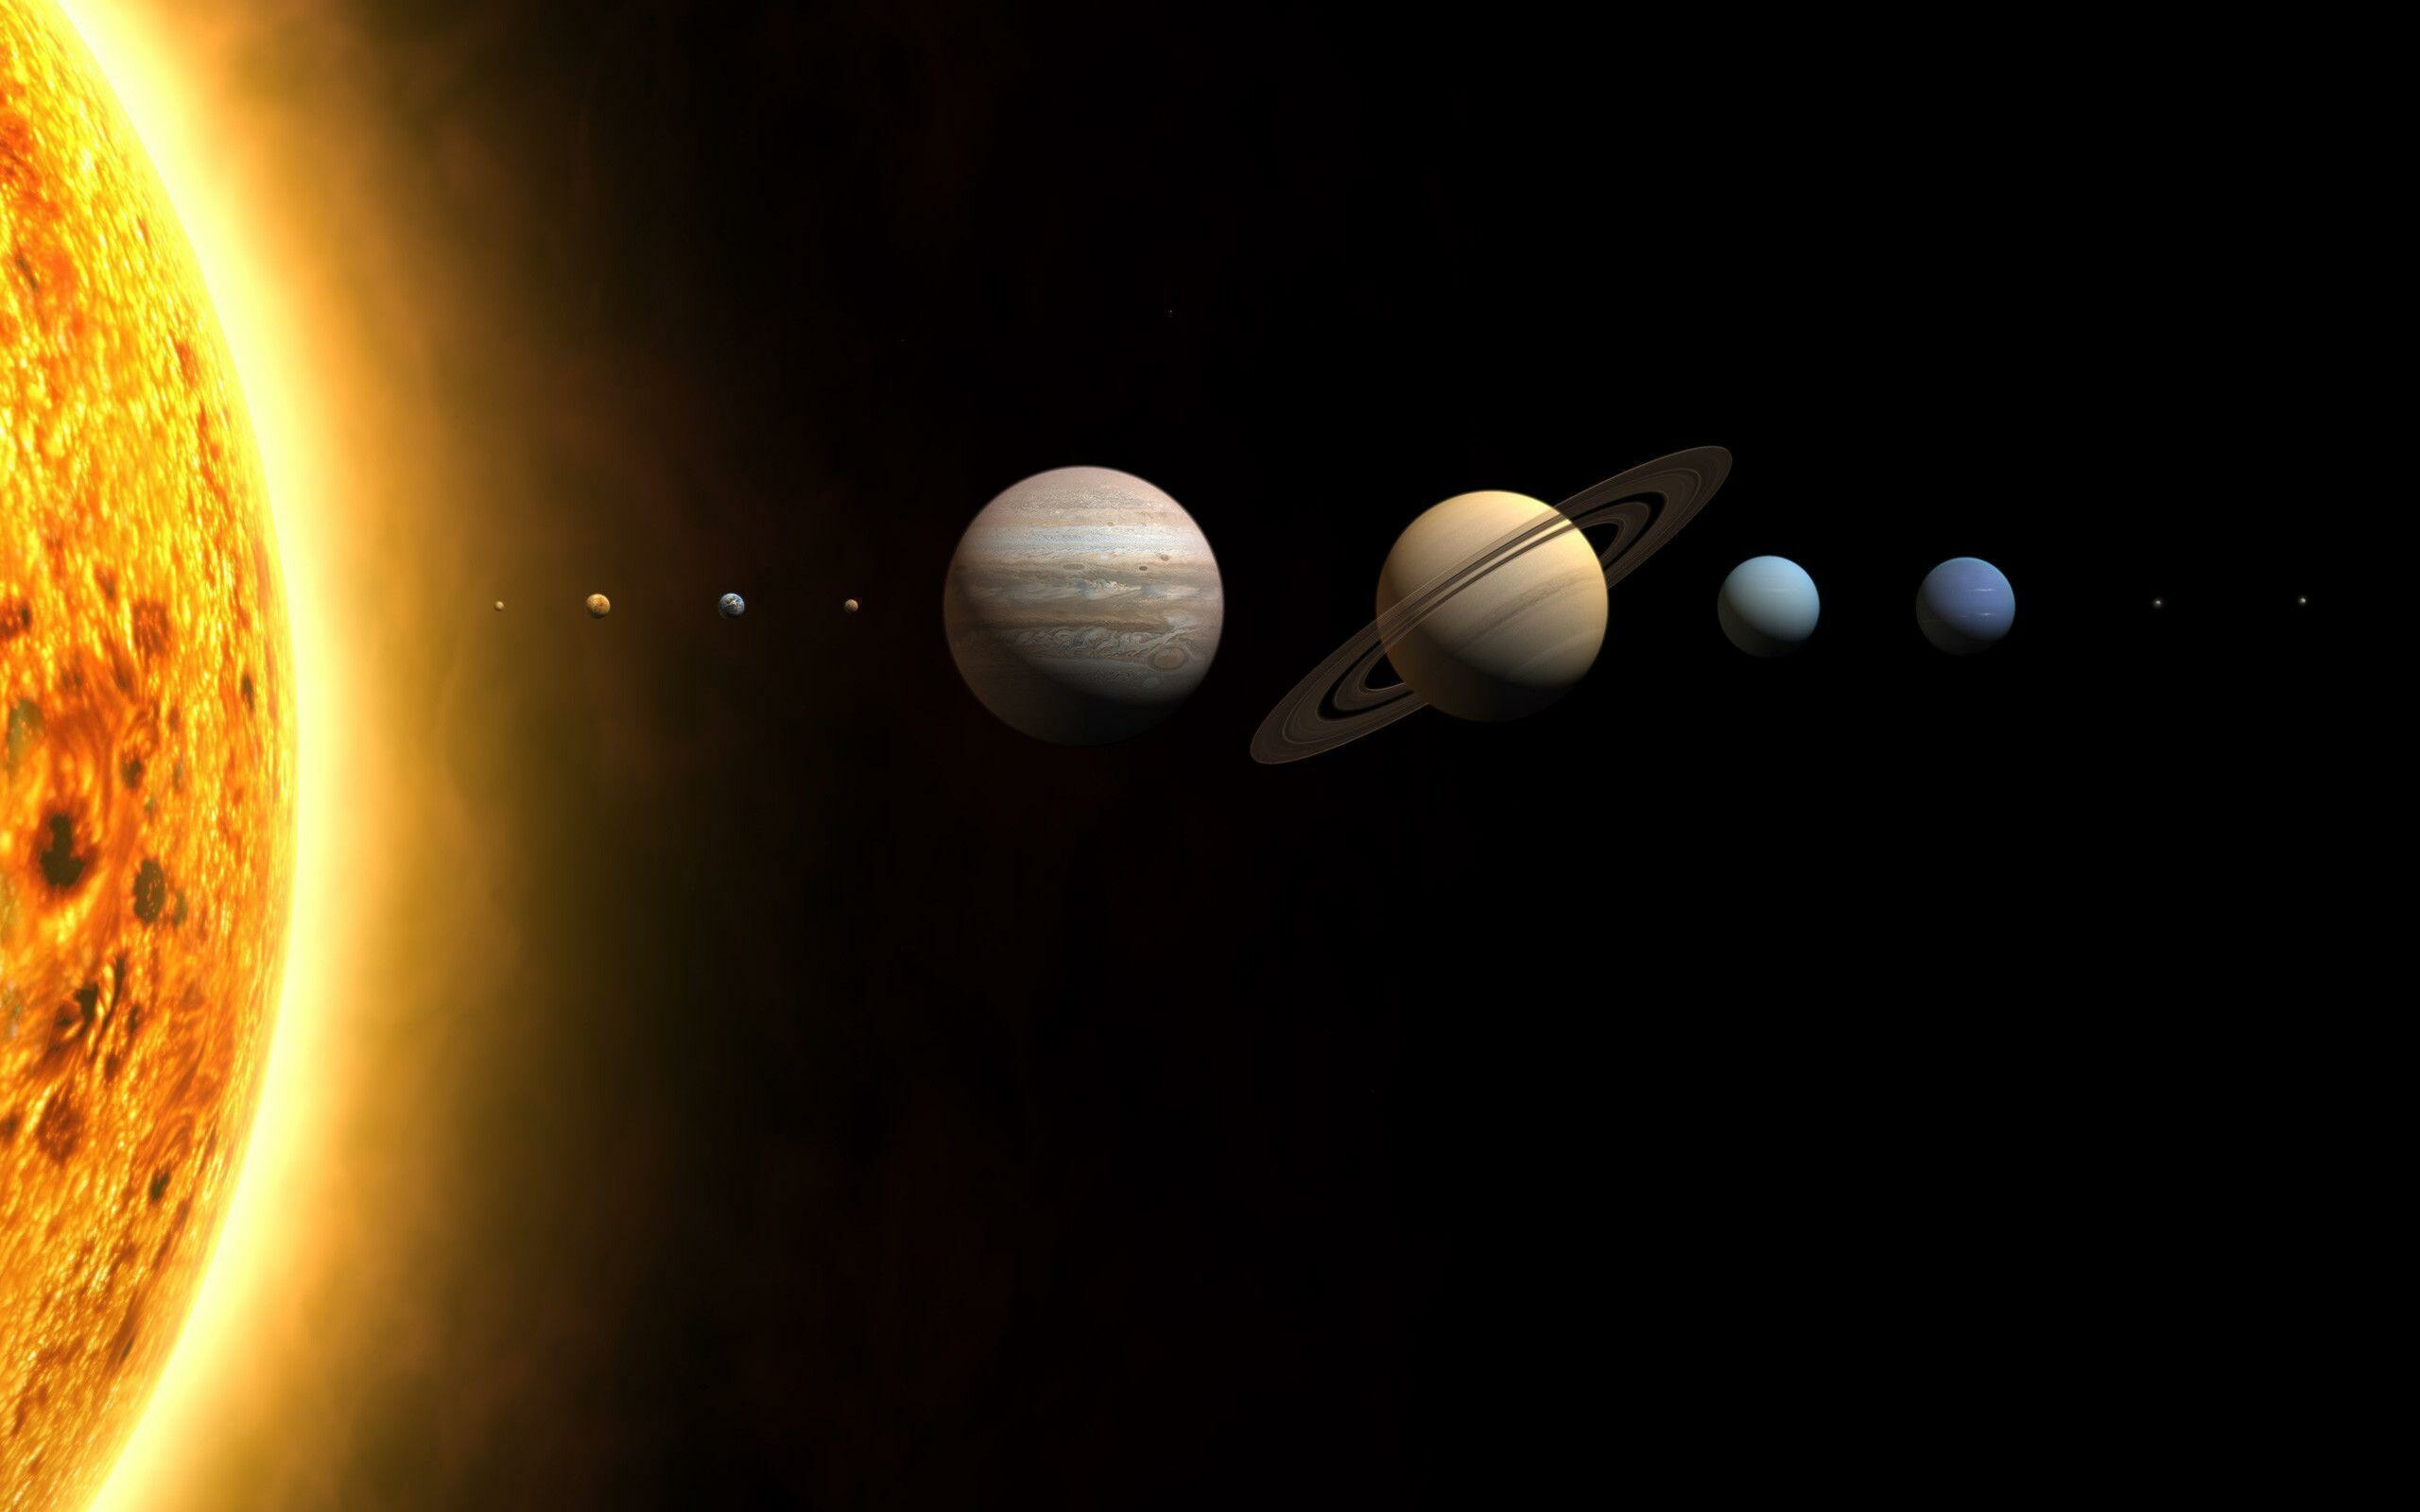 Solar System: The collection of all materials within the gravitational pull of the sun, Planets, Moons, Asteroids. 2560x1600 HD Wallpaper.